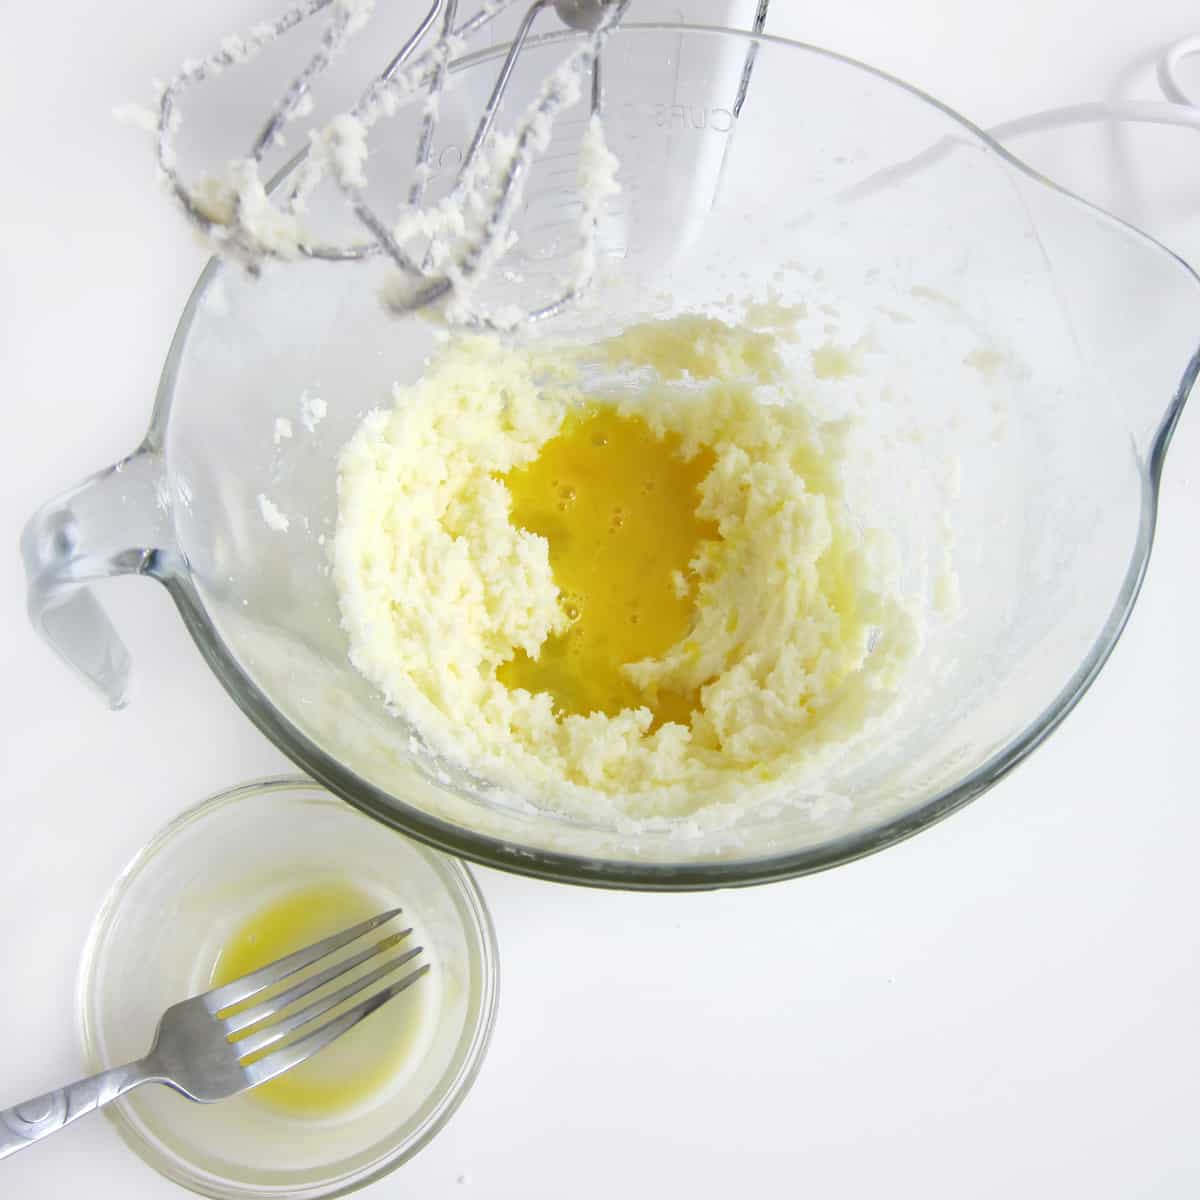 beaten egg poured on top of beaten butter and sugar in mixing bowl